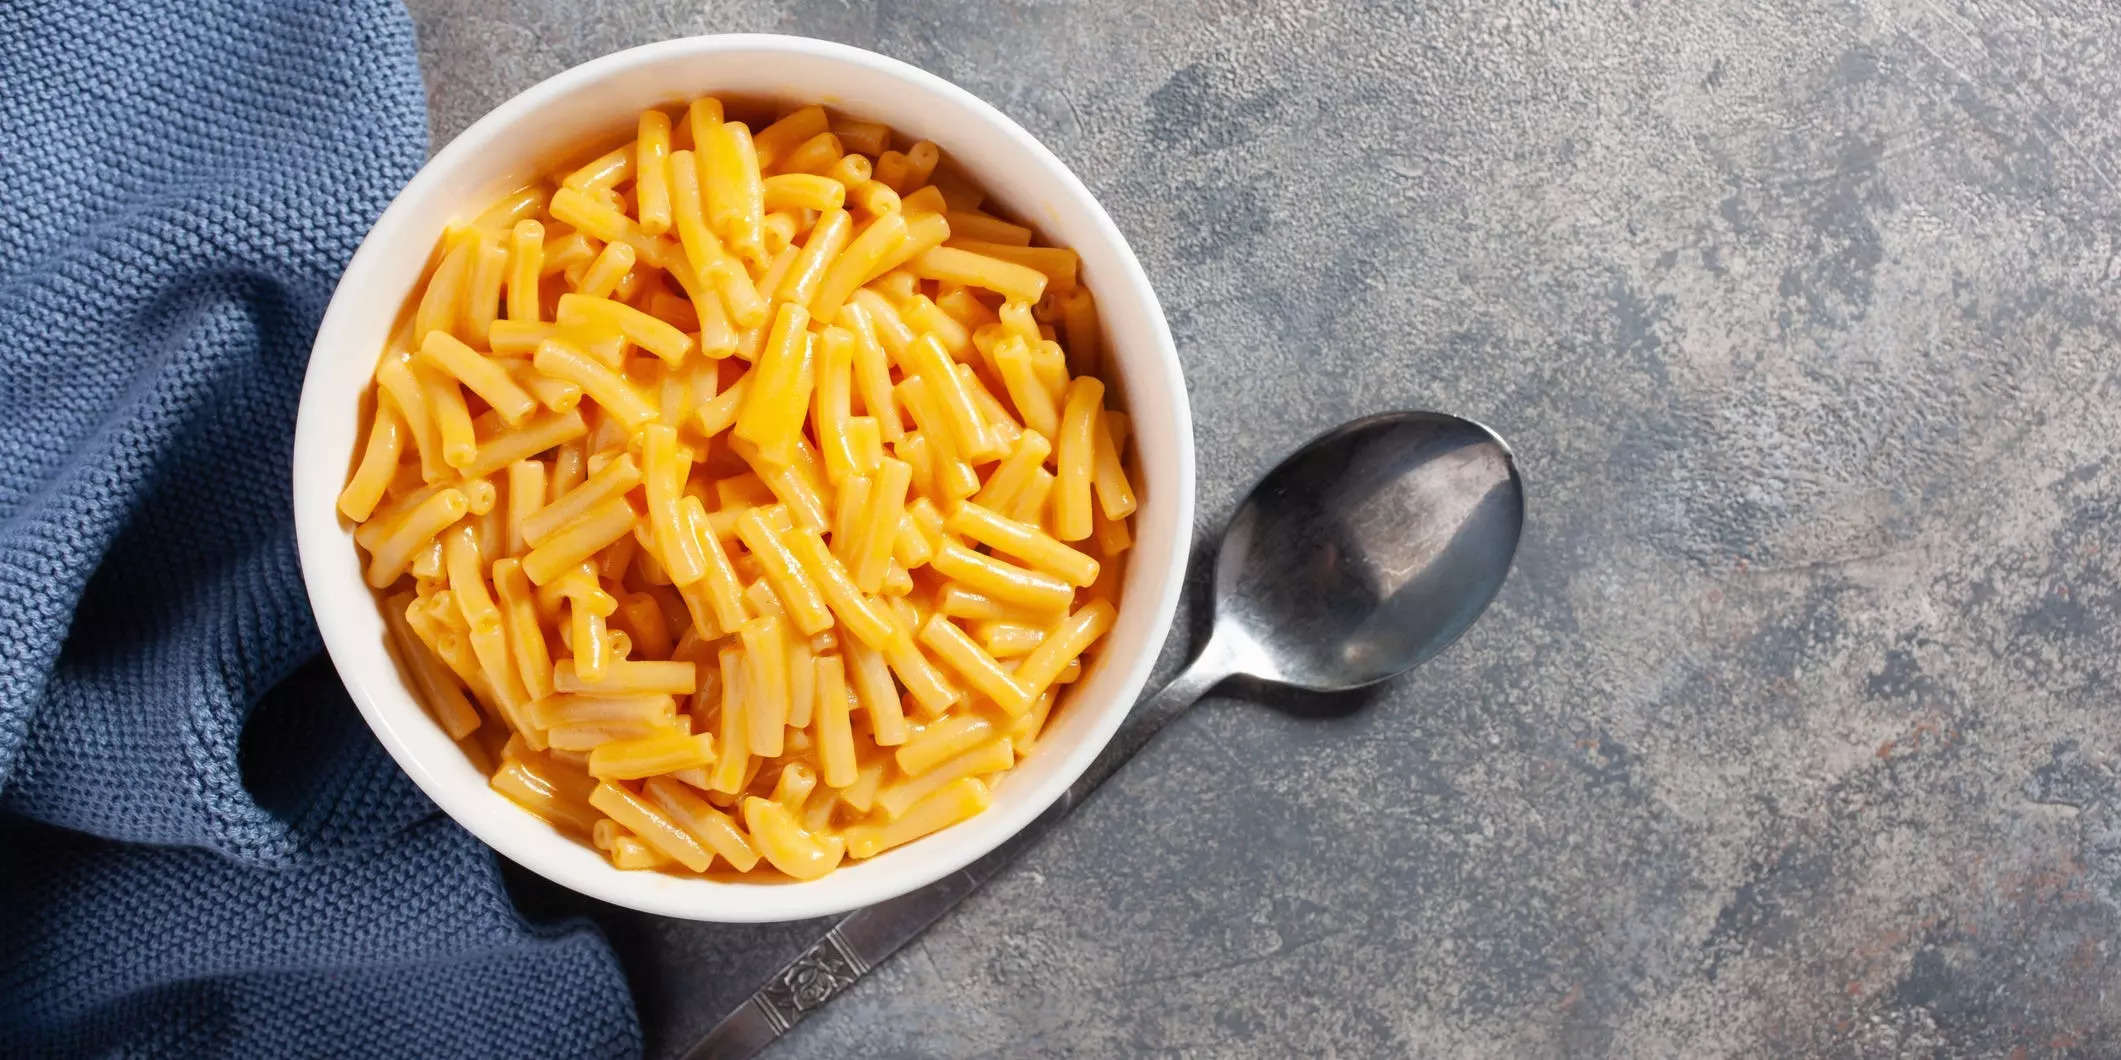 https://www.businessinsider.in/photo/90297465/9-easy-ways-to-make-boxed-mac-and-cheese-better-if-youre-bored-of-the-store-bought-flavor.jpg?imgsize=236272